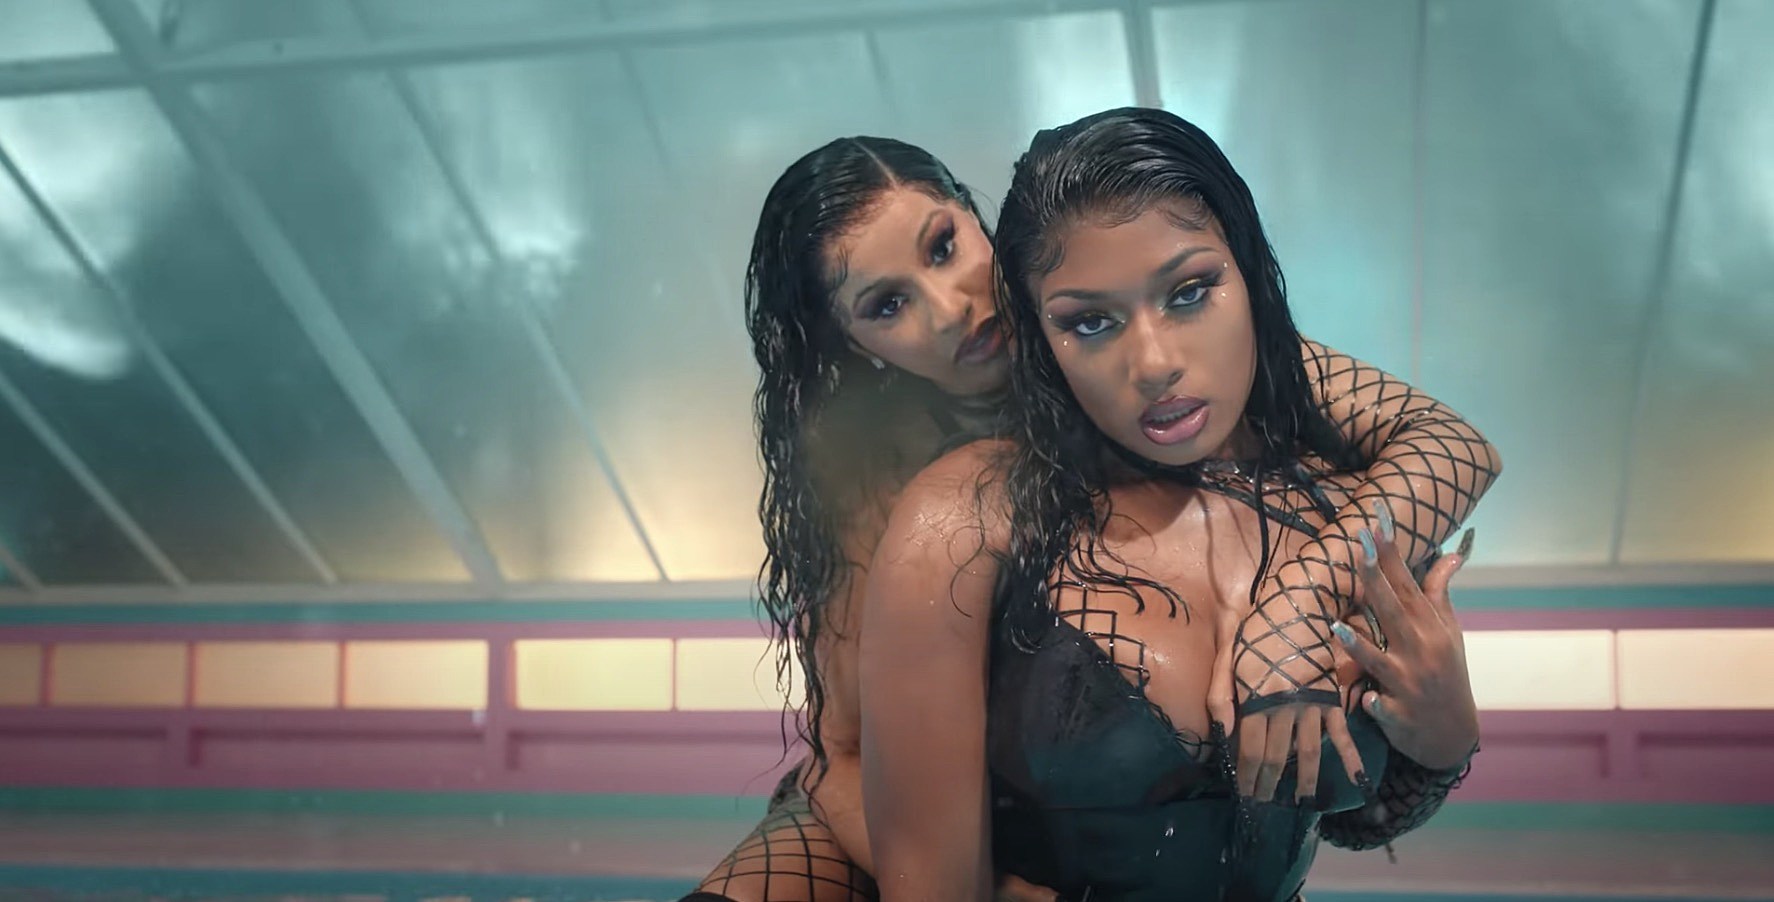 Watch Cardi B & Megan Thee Stallion's over-the-top video for new